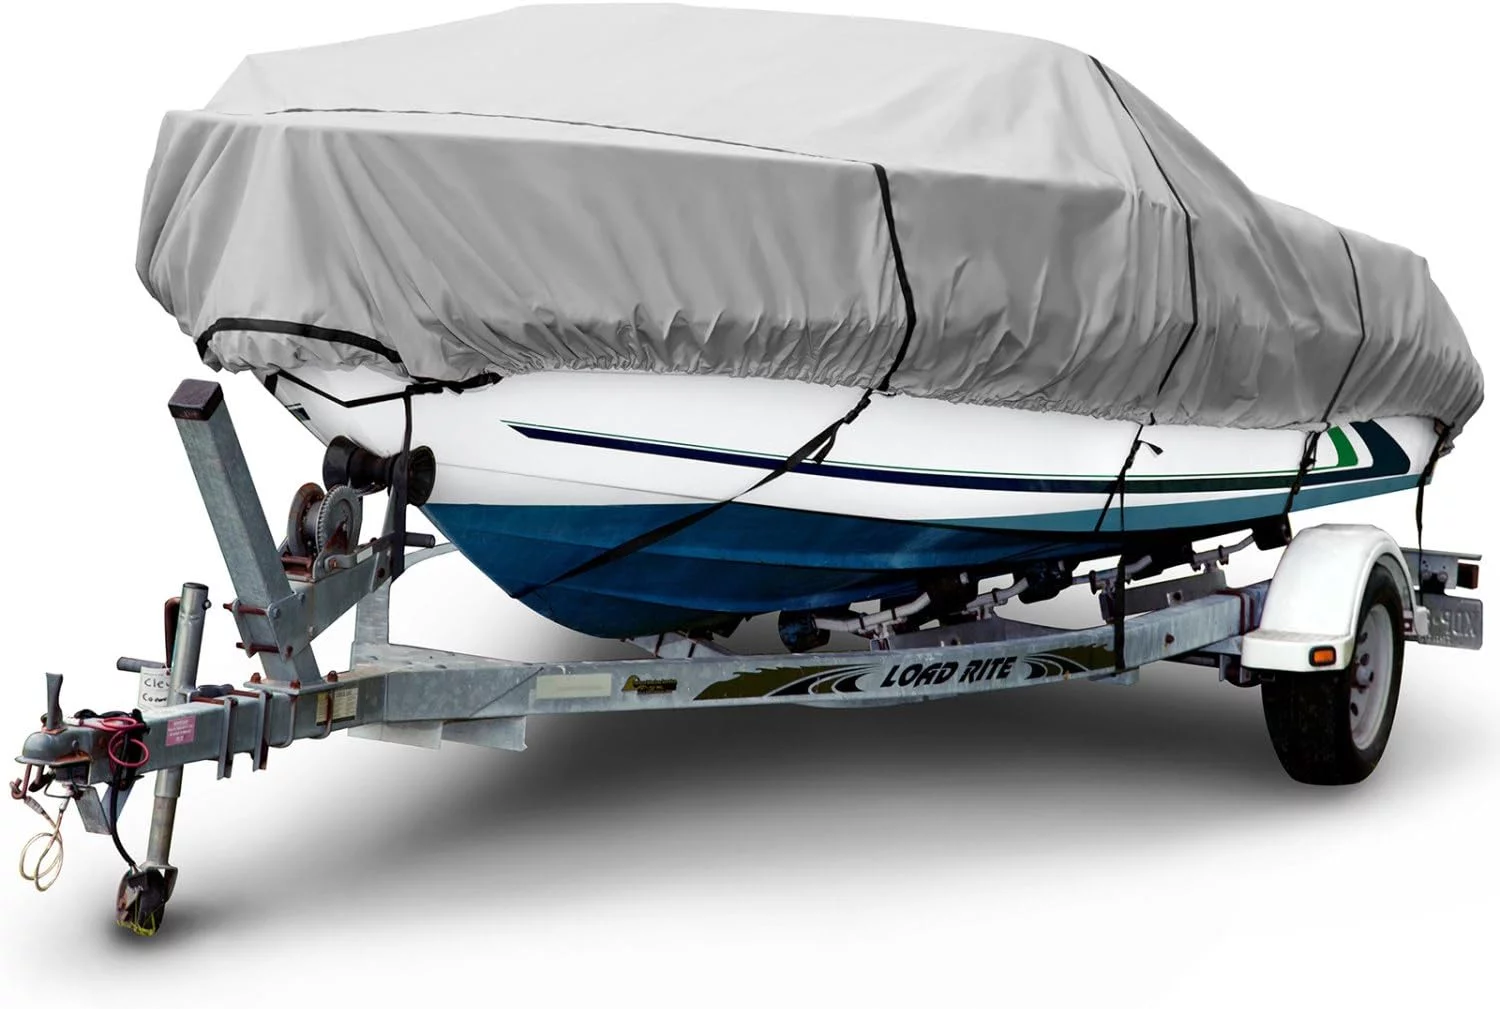 Best Boat Covers in the Market